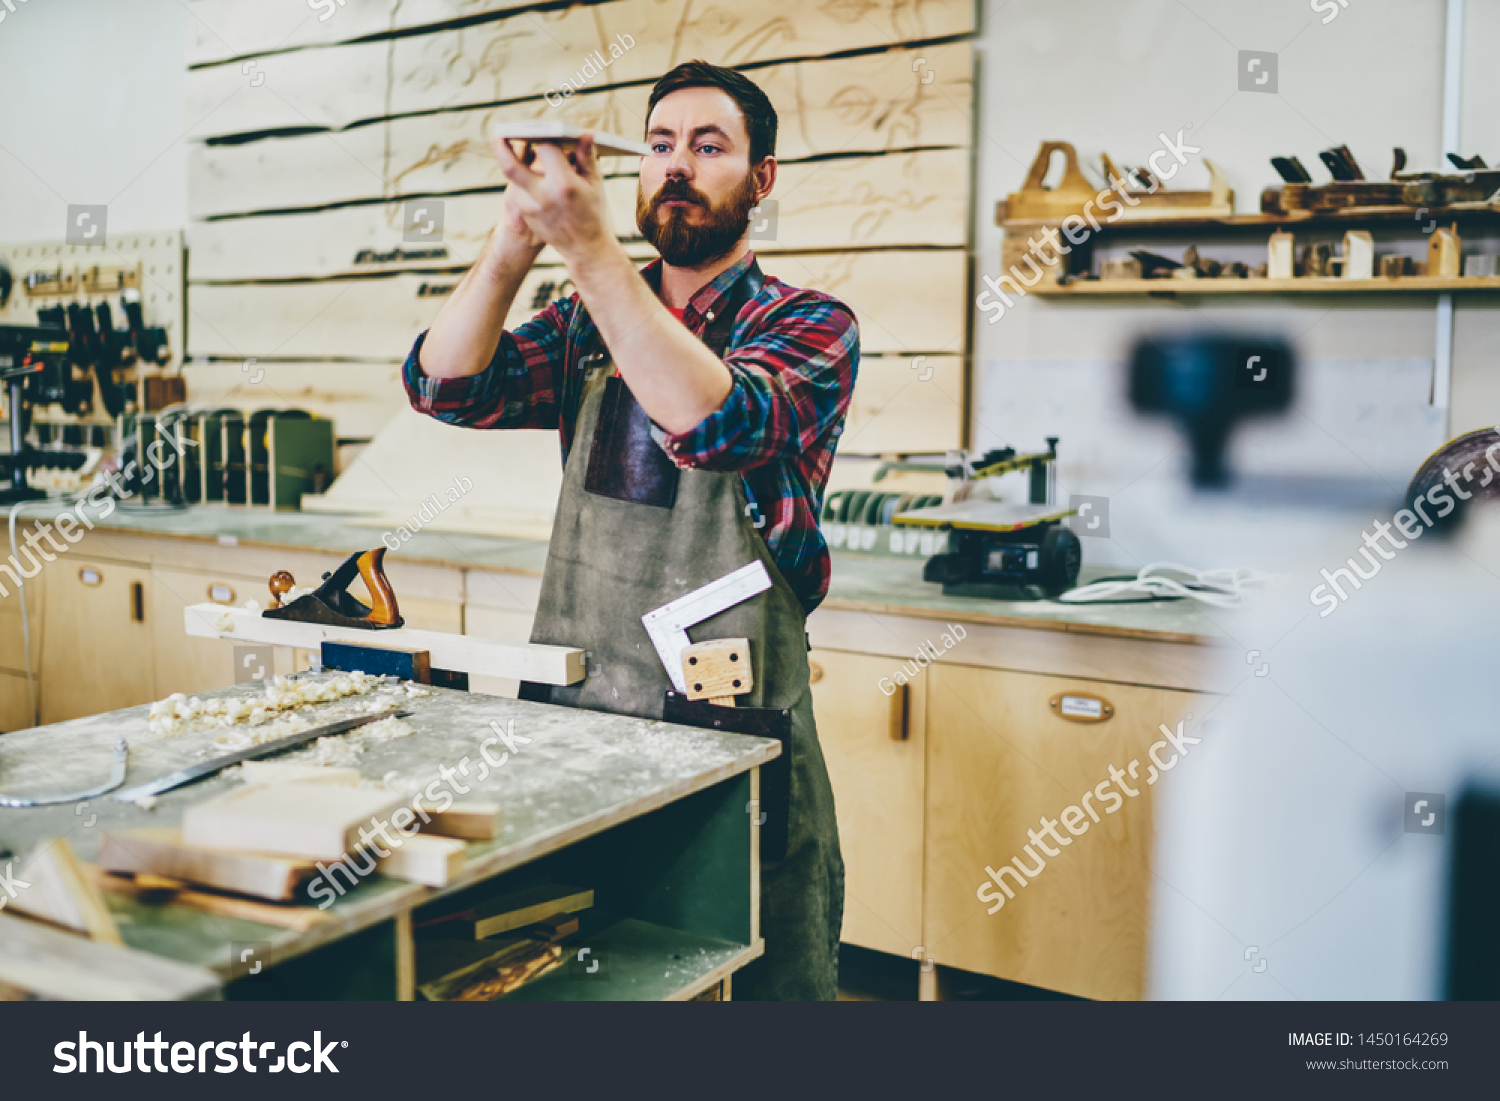 Bearded carpenter enjoying hobby working process at his workstation of manufacturing, side view of skilled self employed artisan in apron checking element for handmade construction of wooden plank #1450164269